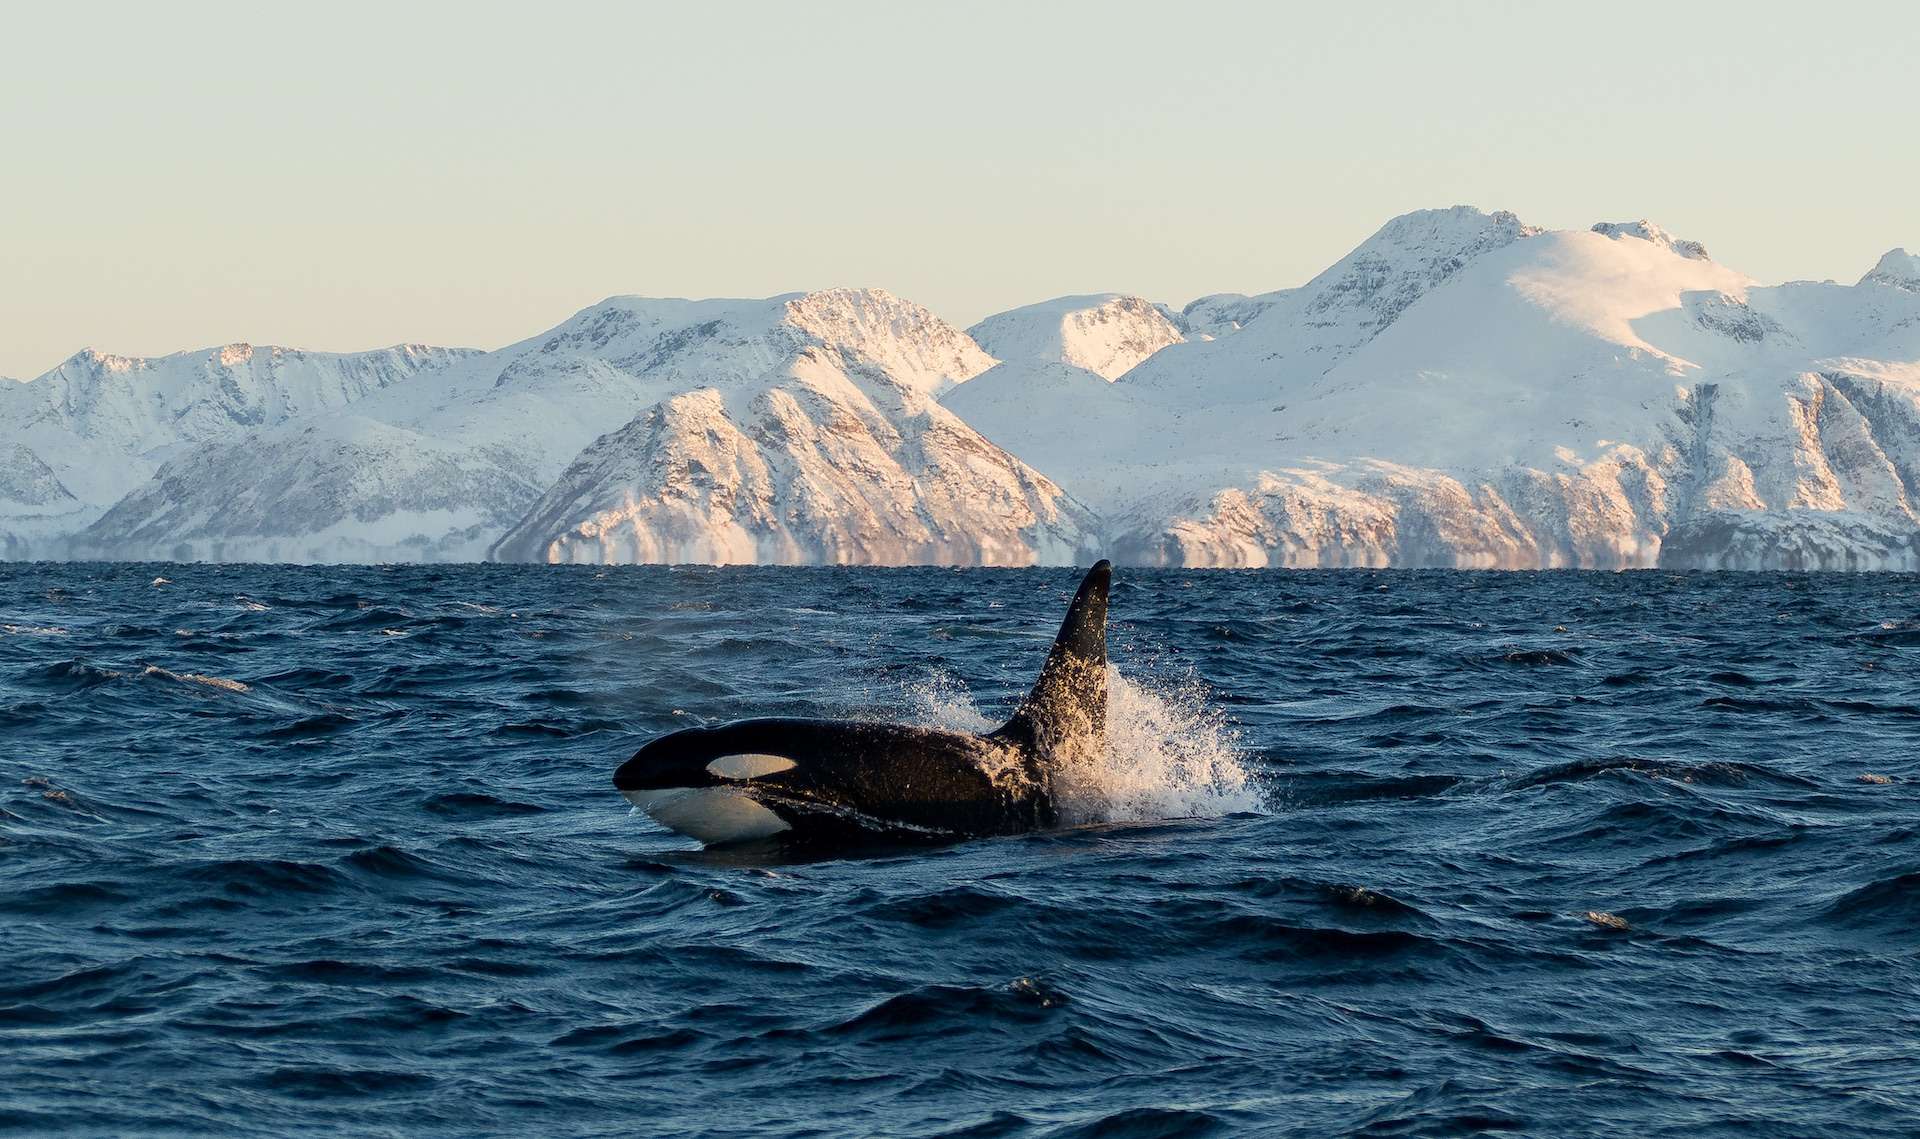 Orca (Orcinus / cetacean / killer whale) shows his head and fin in the fjords of the lofoten in norway during whale watching